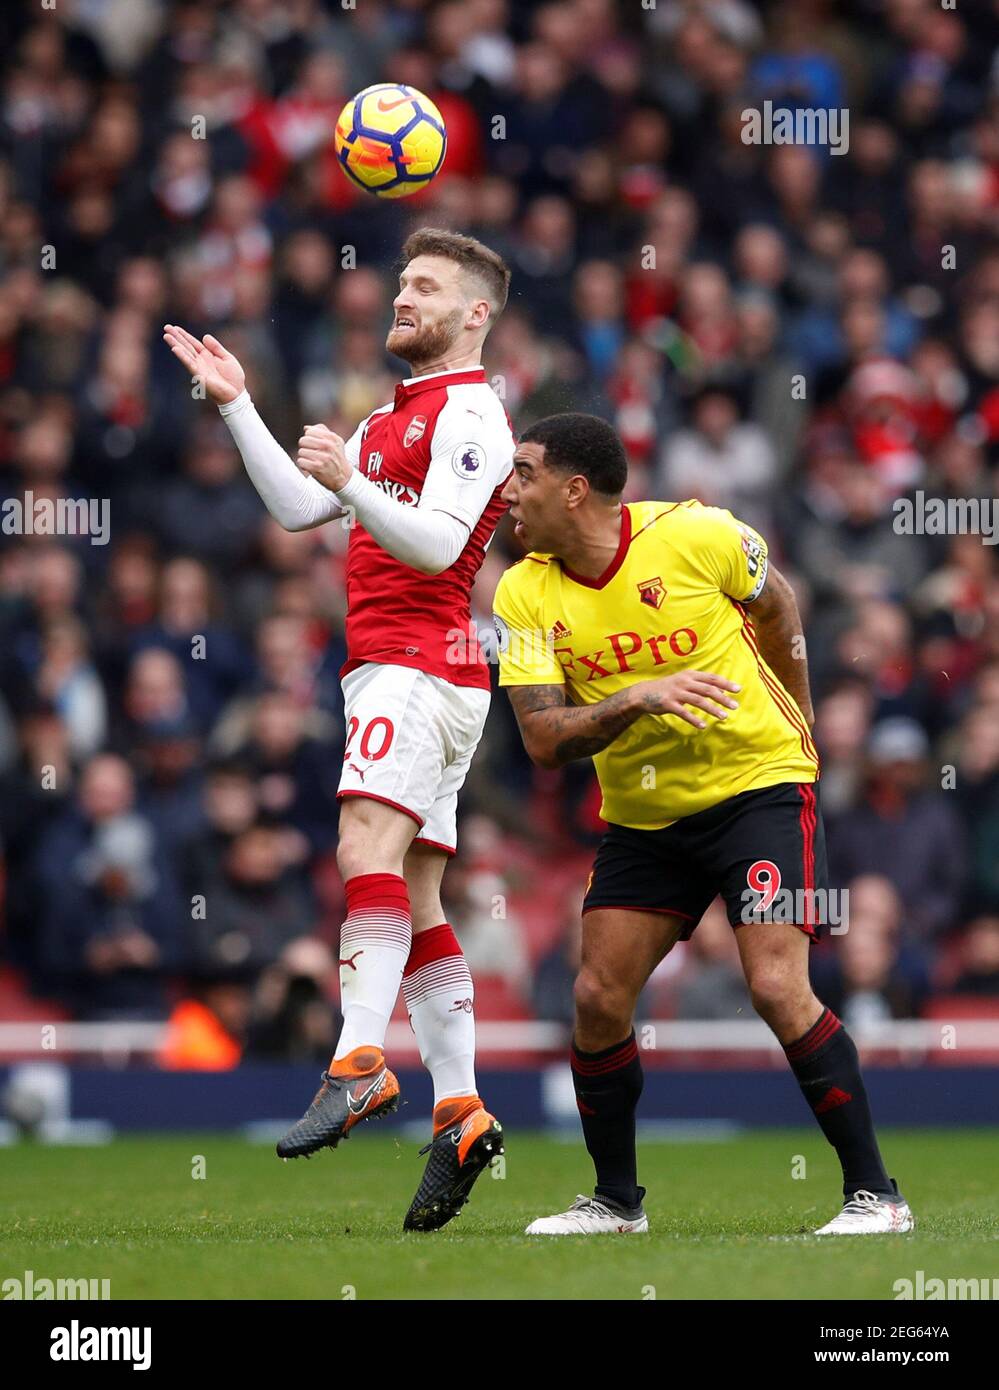 Soccer Football - Premier League - Arsenal vs Watford - Emirates Stadium, London, Britain - March 11, 2018   Arsenal's Shkodran Mustafi in action with Watford's Troy Deeney                REUTERS/Eddie Keogh    EDITORIAL USE ONLY. No use with unauthorized audio, video, data, fixture lists, club/league logos or 'live' services. Online in-match use limited to 75 images, no video emulation. No use in betting, games or single club/league/player publications.  Please contact your account representative for further details. Stock Photo